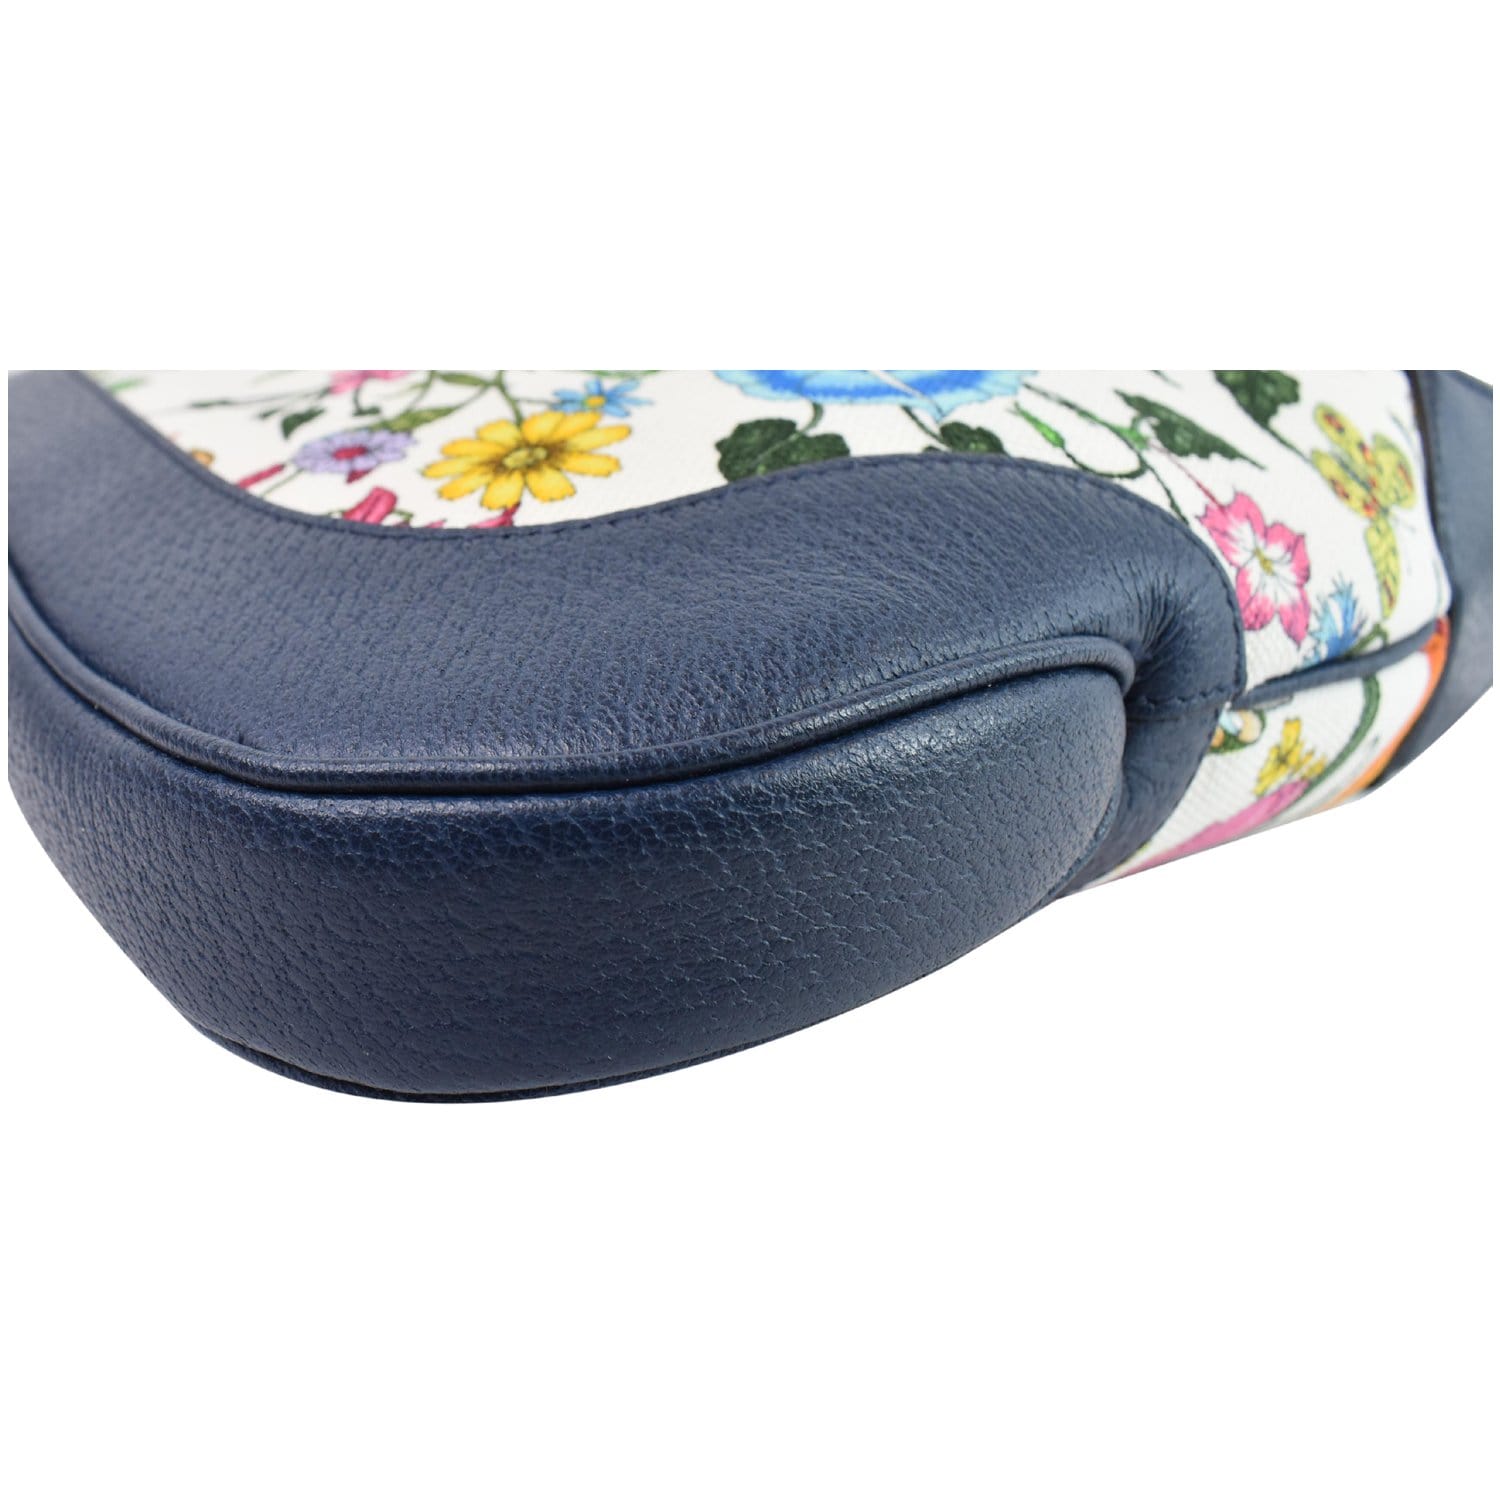 Gucci Jackie Hobo Flora Canvas with Leather Medium Blue 2382751